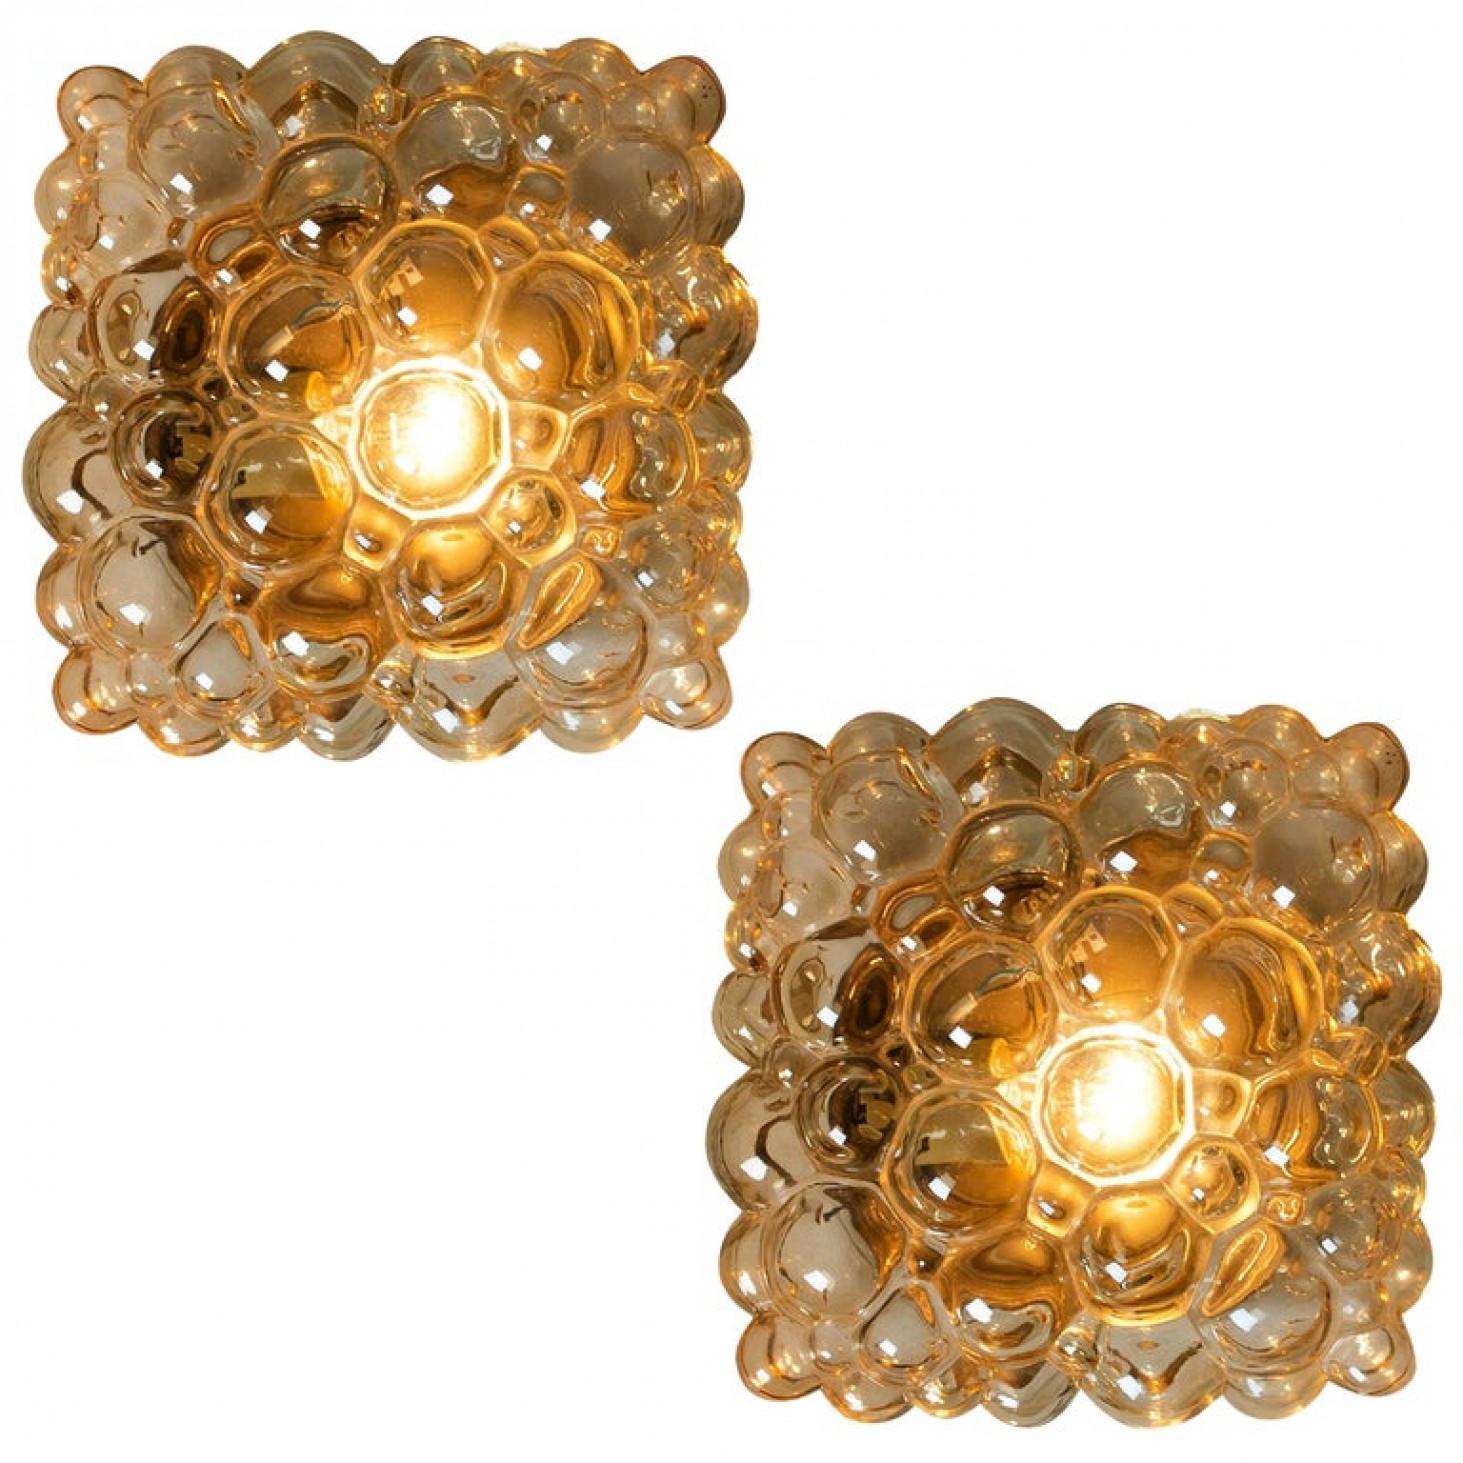 Beautiful high-end large bubble wall lights or flush mounts by Helena Tynell for Glashütte Limburg, Germany, 1960s.
A design Classic, made of glossy amber bubble glass.

The price is for singel one.  Can work as impressive wall lights or ceiling